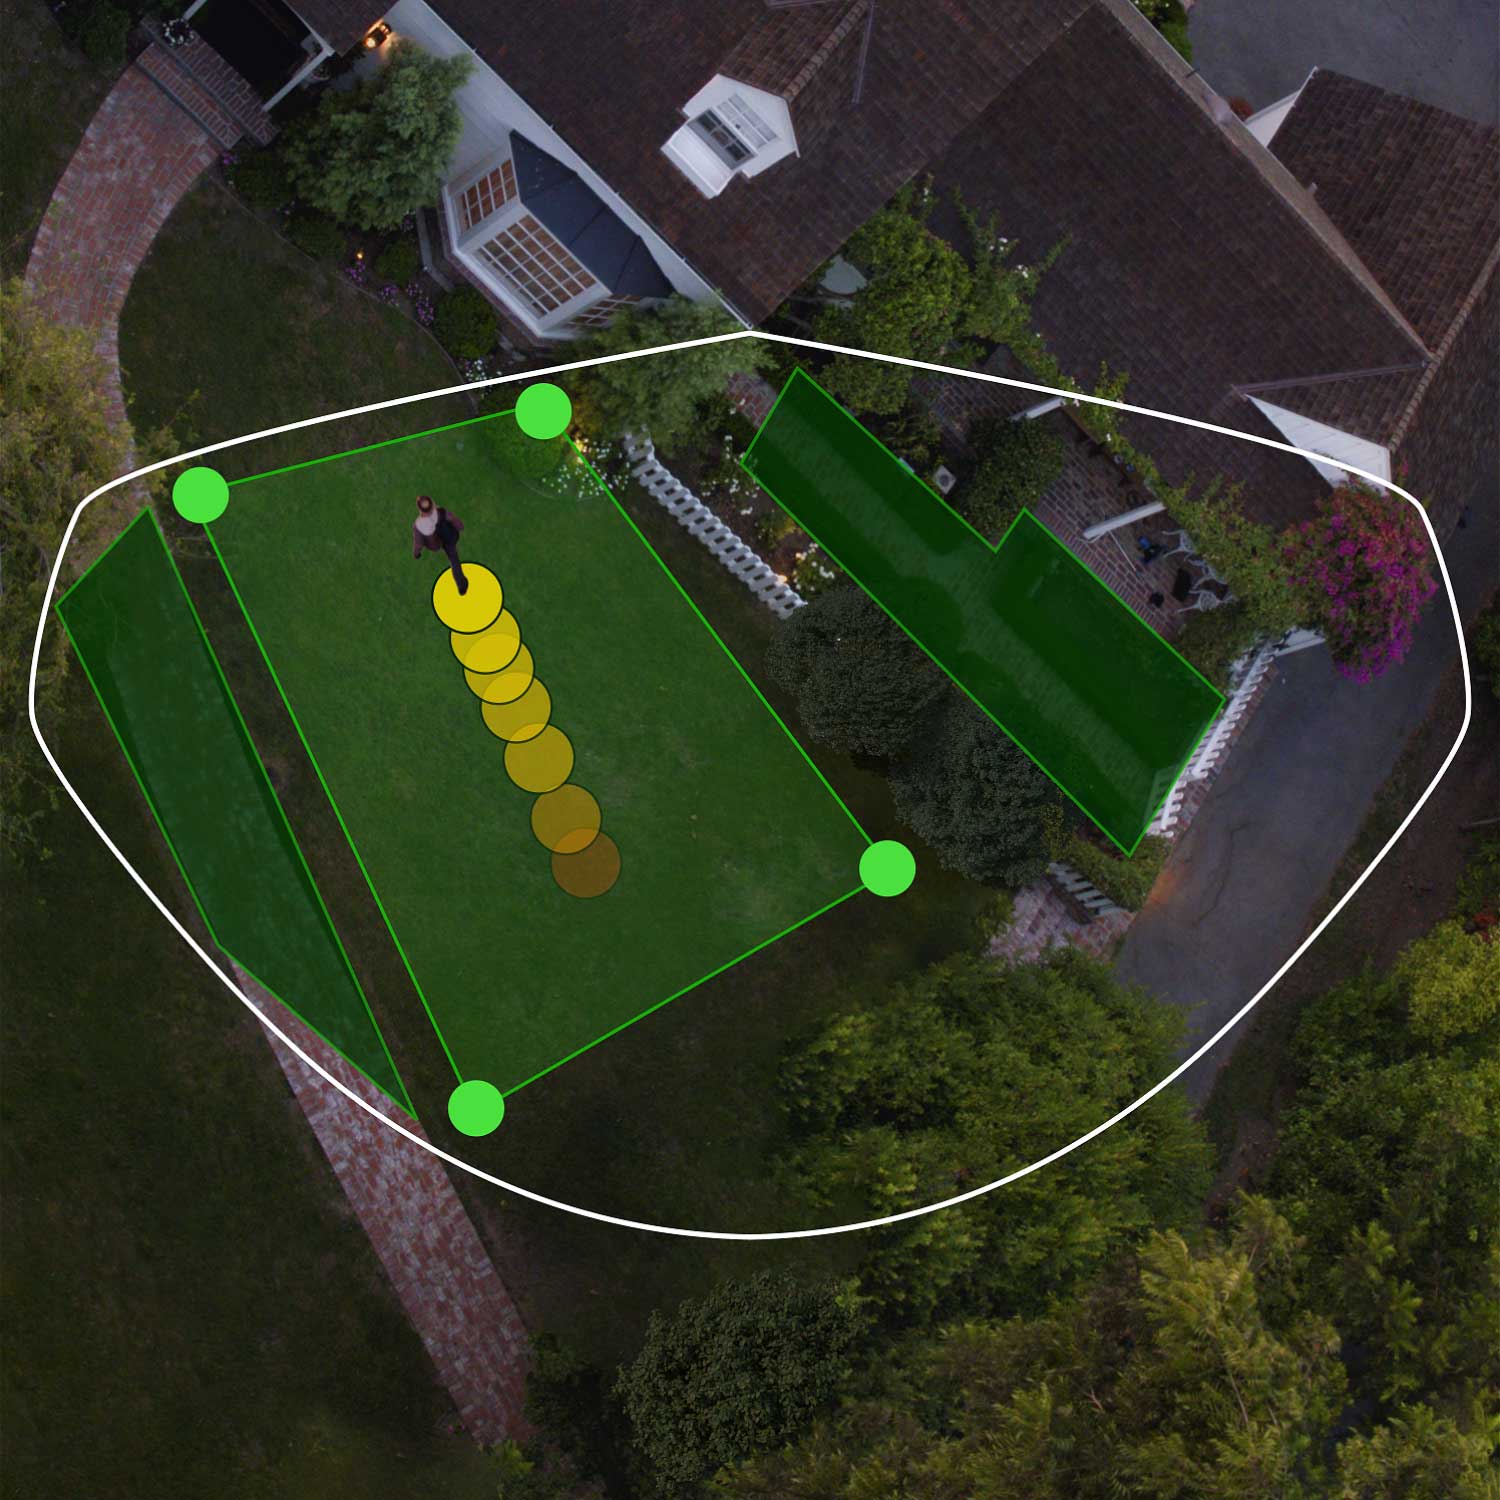 Spotlight Cam Pro (Plug-In) - Aerial view of front of house showing bird's eye view zones in green. Person walks toward front door, their path indicated by yellow dots.